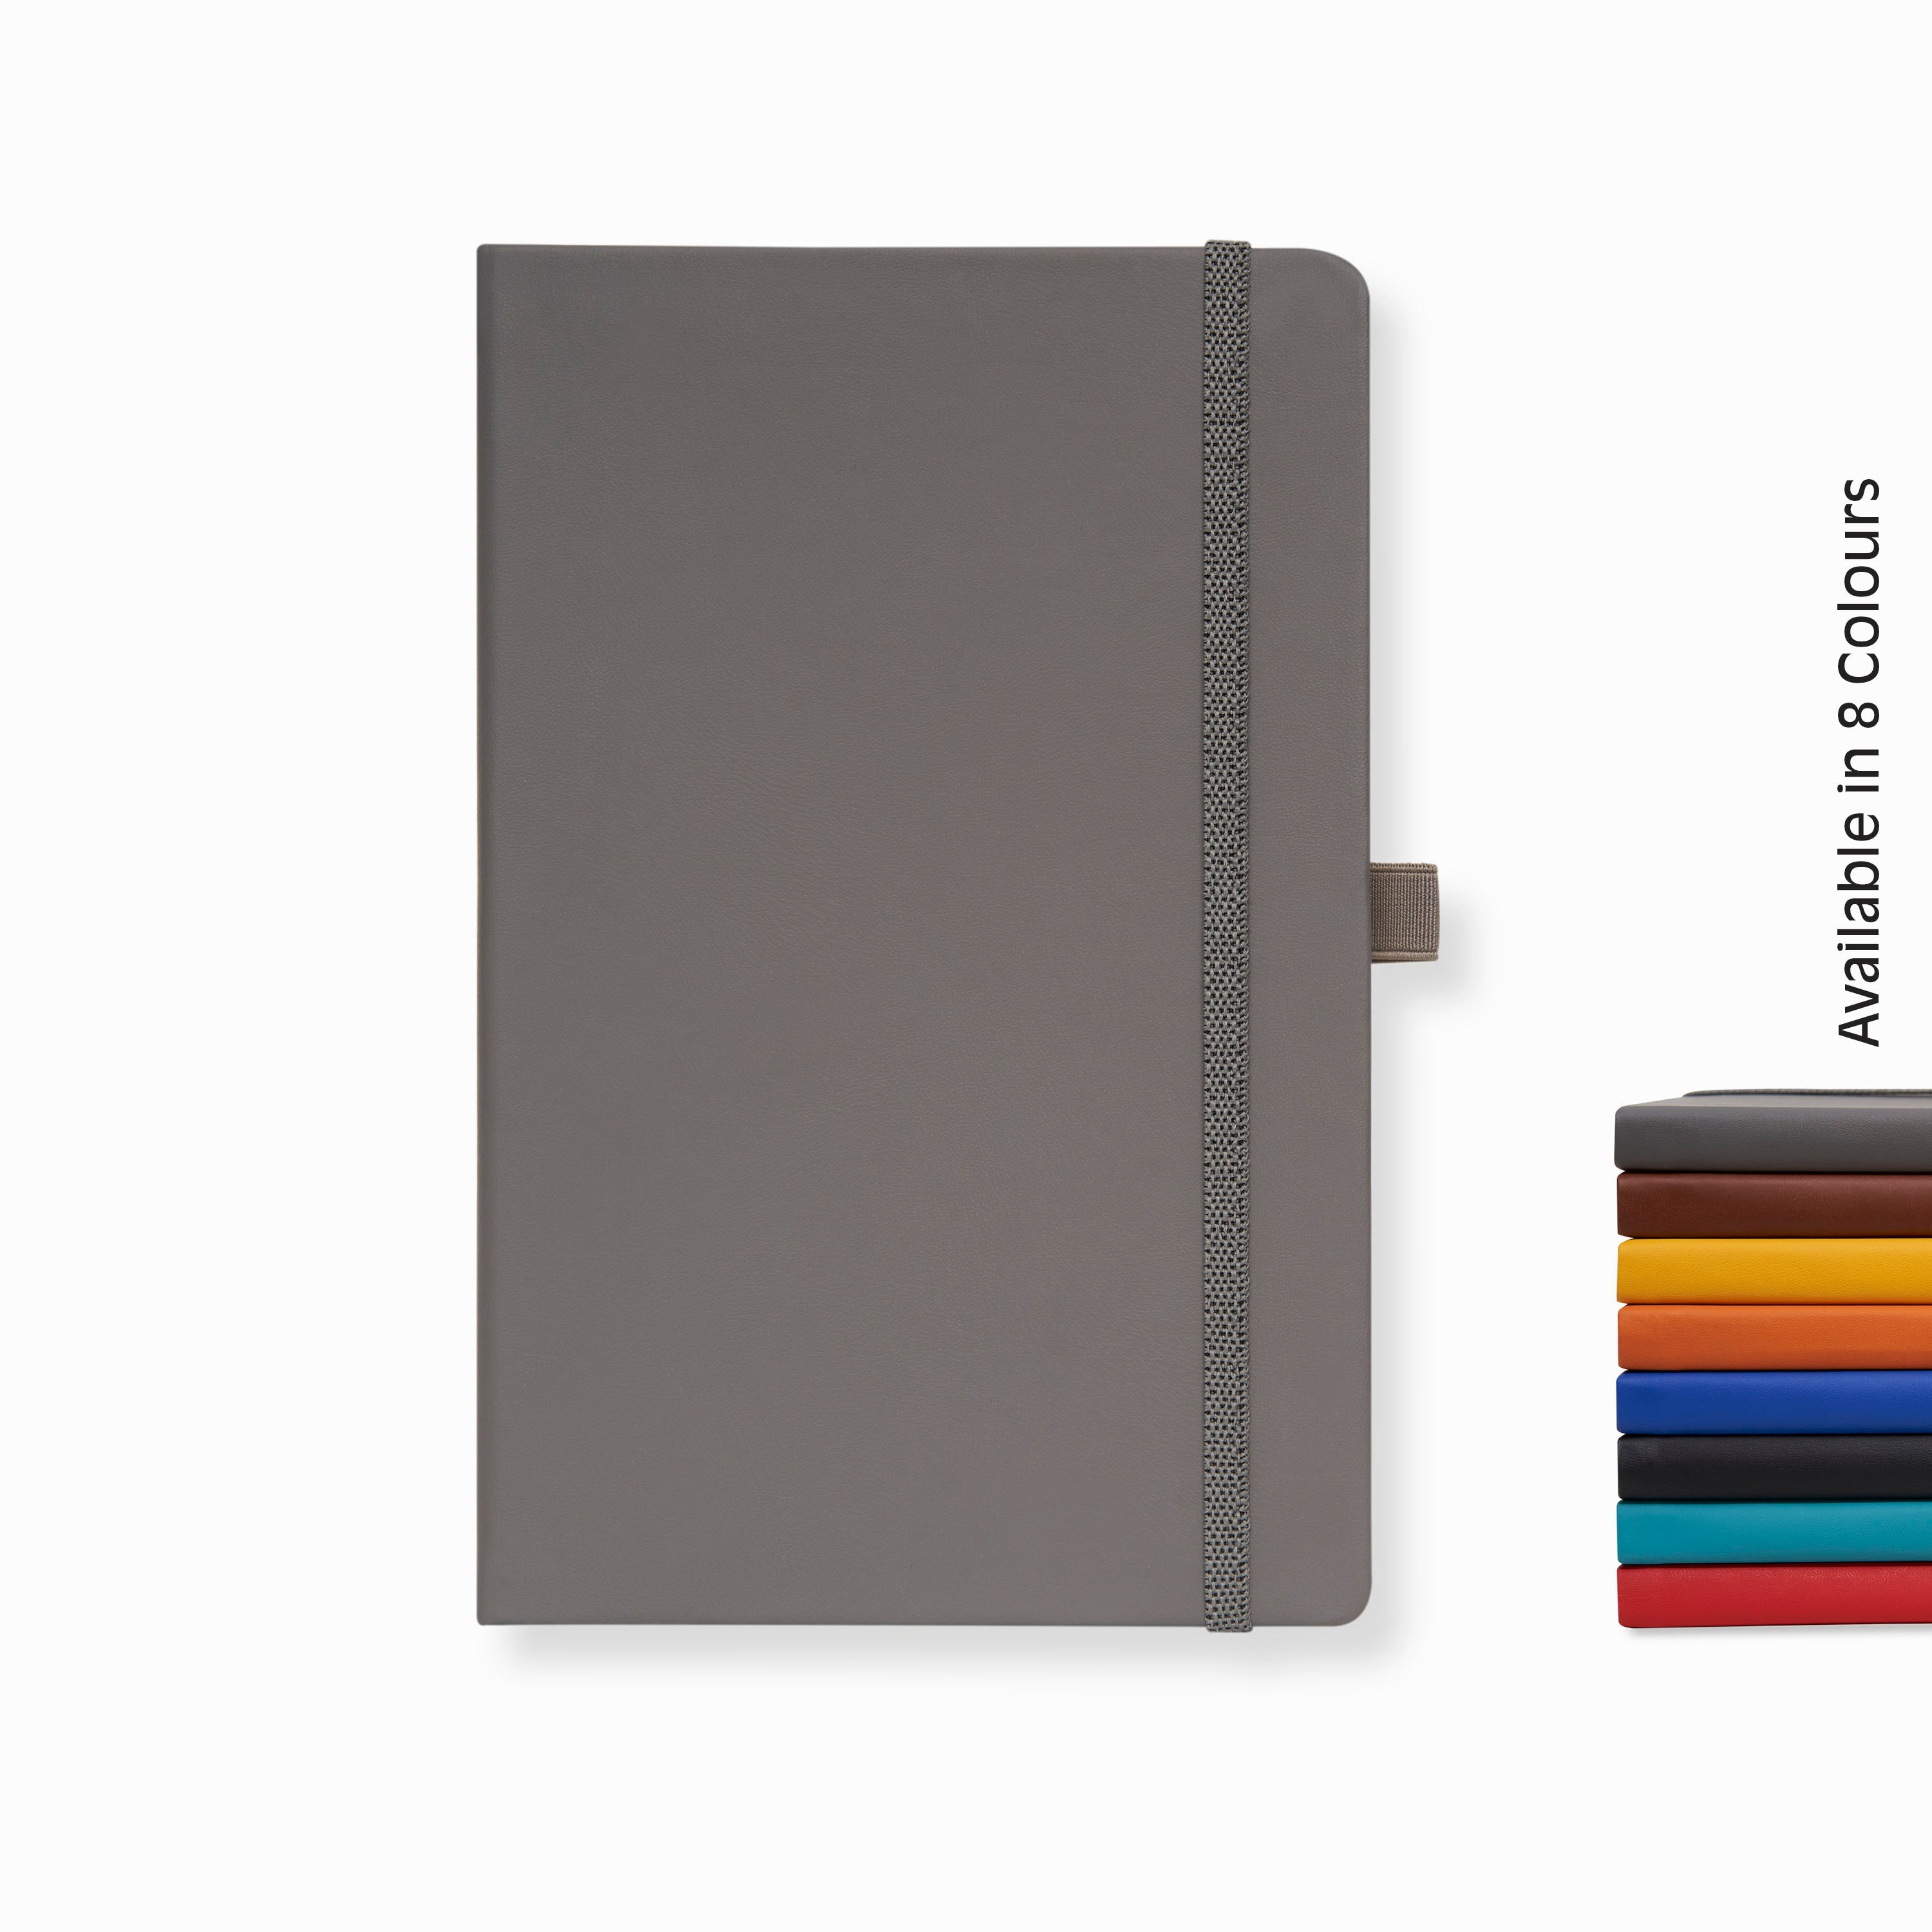 Doodle Pro Series Executive A5 PU Leather Hardbound Ruled Diary with Pen Loop - GREY